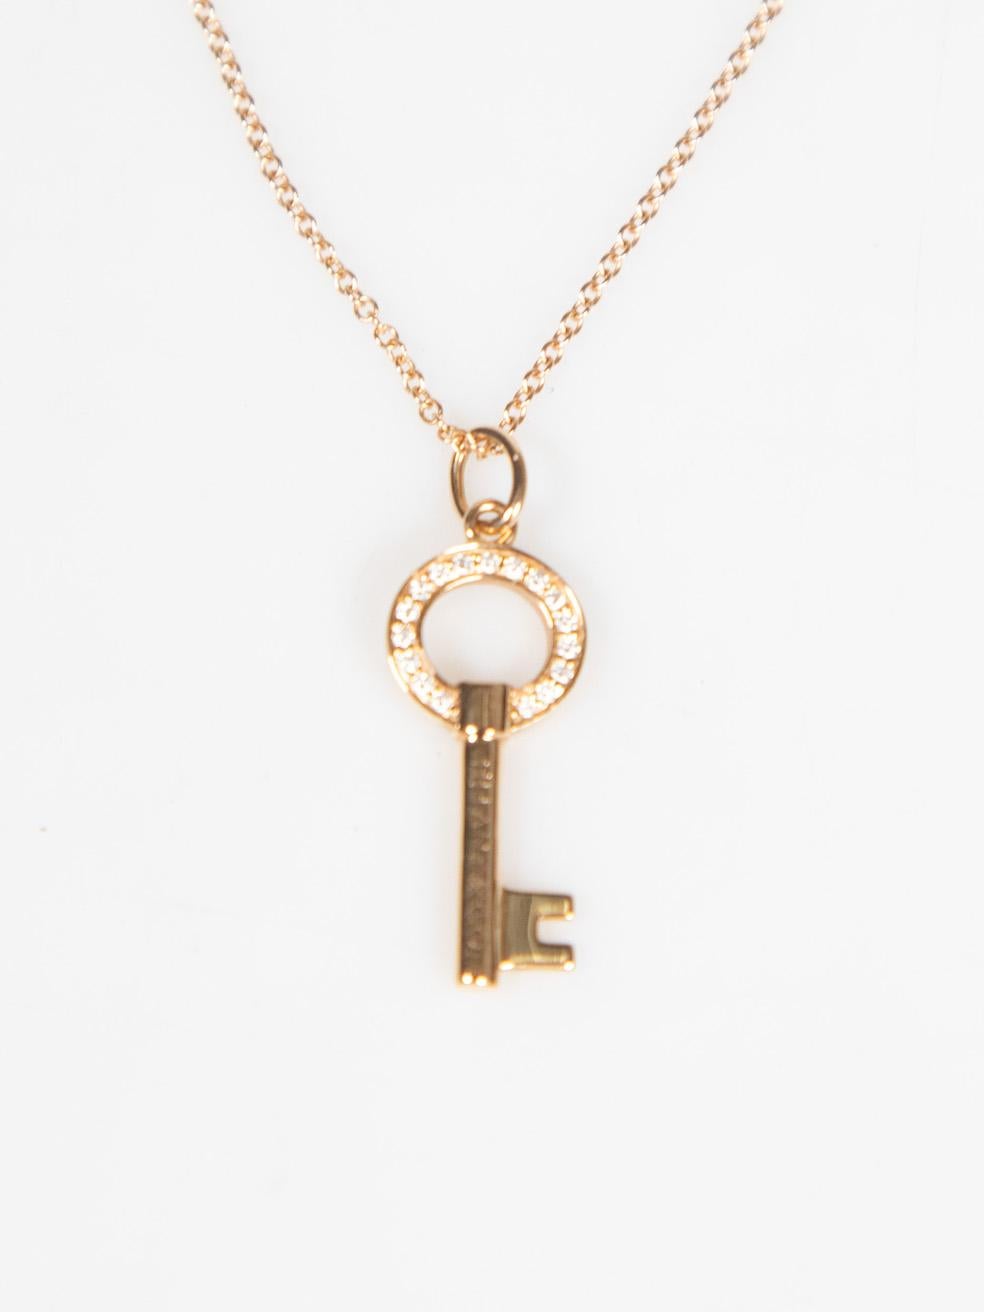 CONDITION is Very good. Hardly any visible wear to necklace is evident on this used Tiffany & Co. designer resale item. This item comes with original box and case.
 
Details
Gold
Necklace
18k Diamond
Key pendant
Clasp fastening
